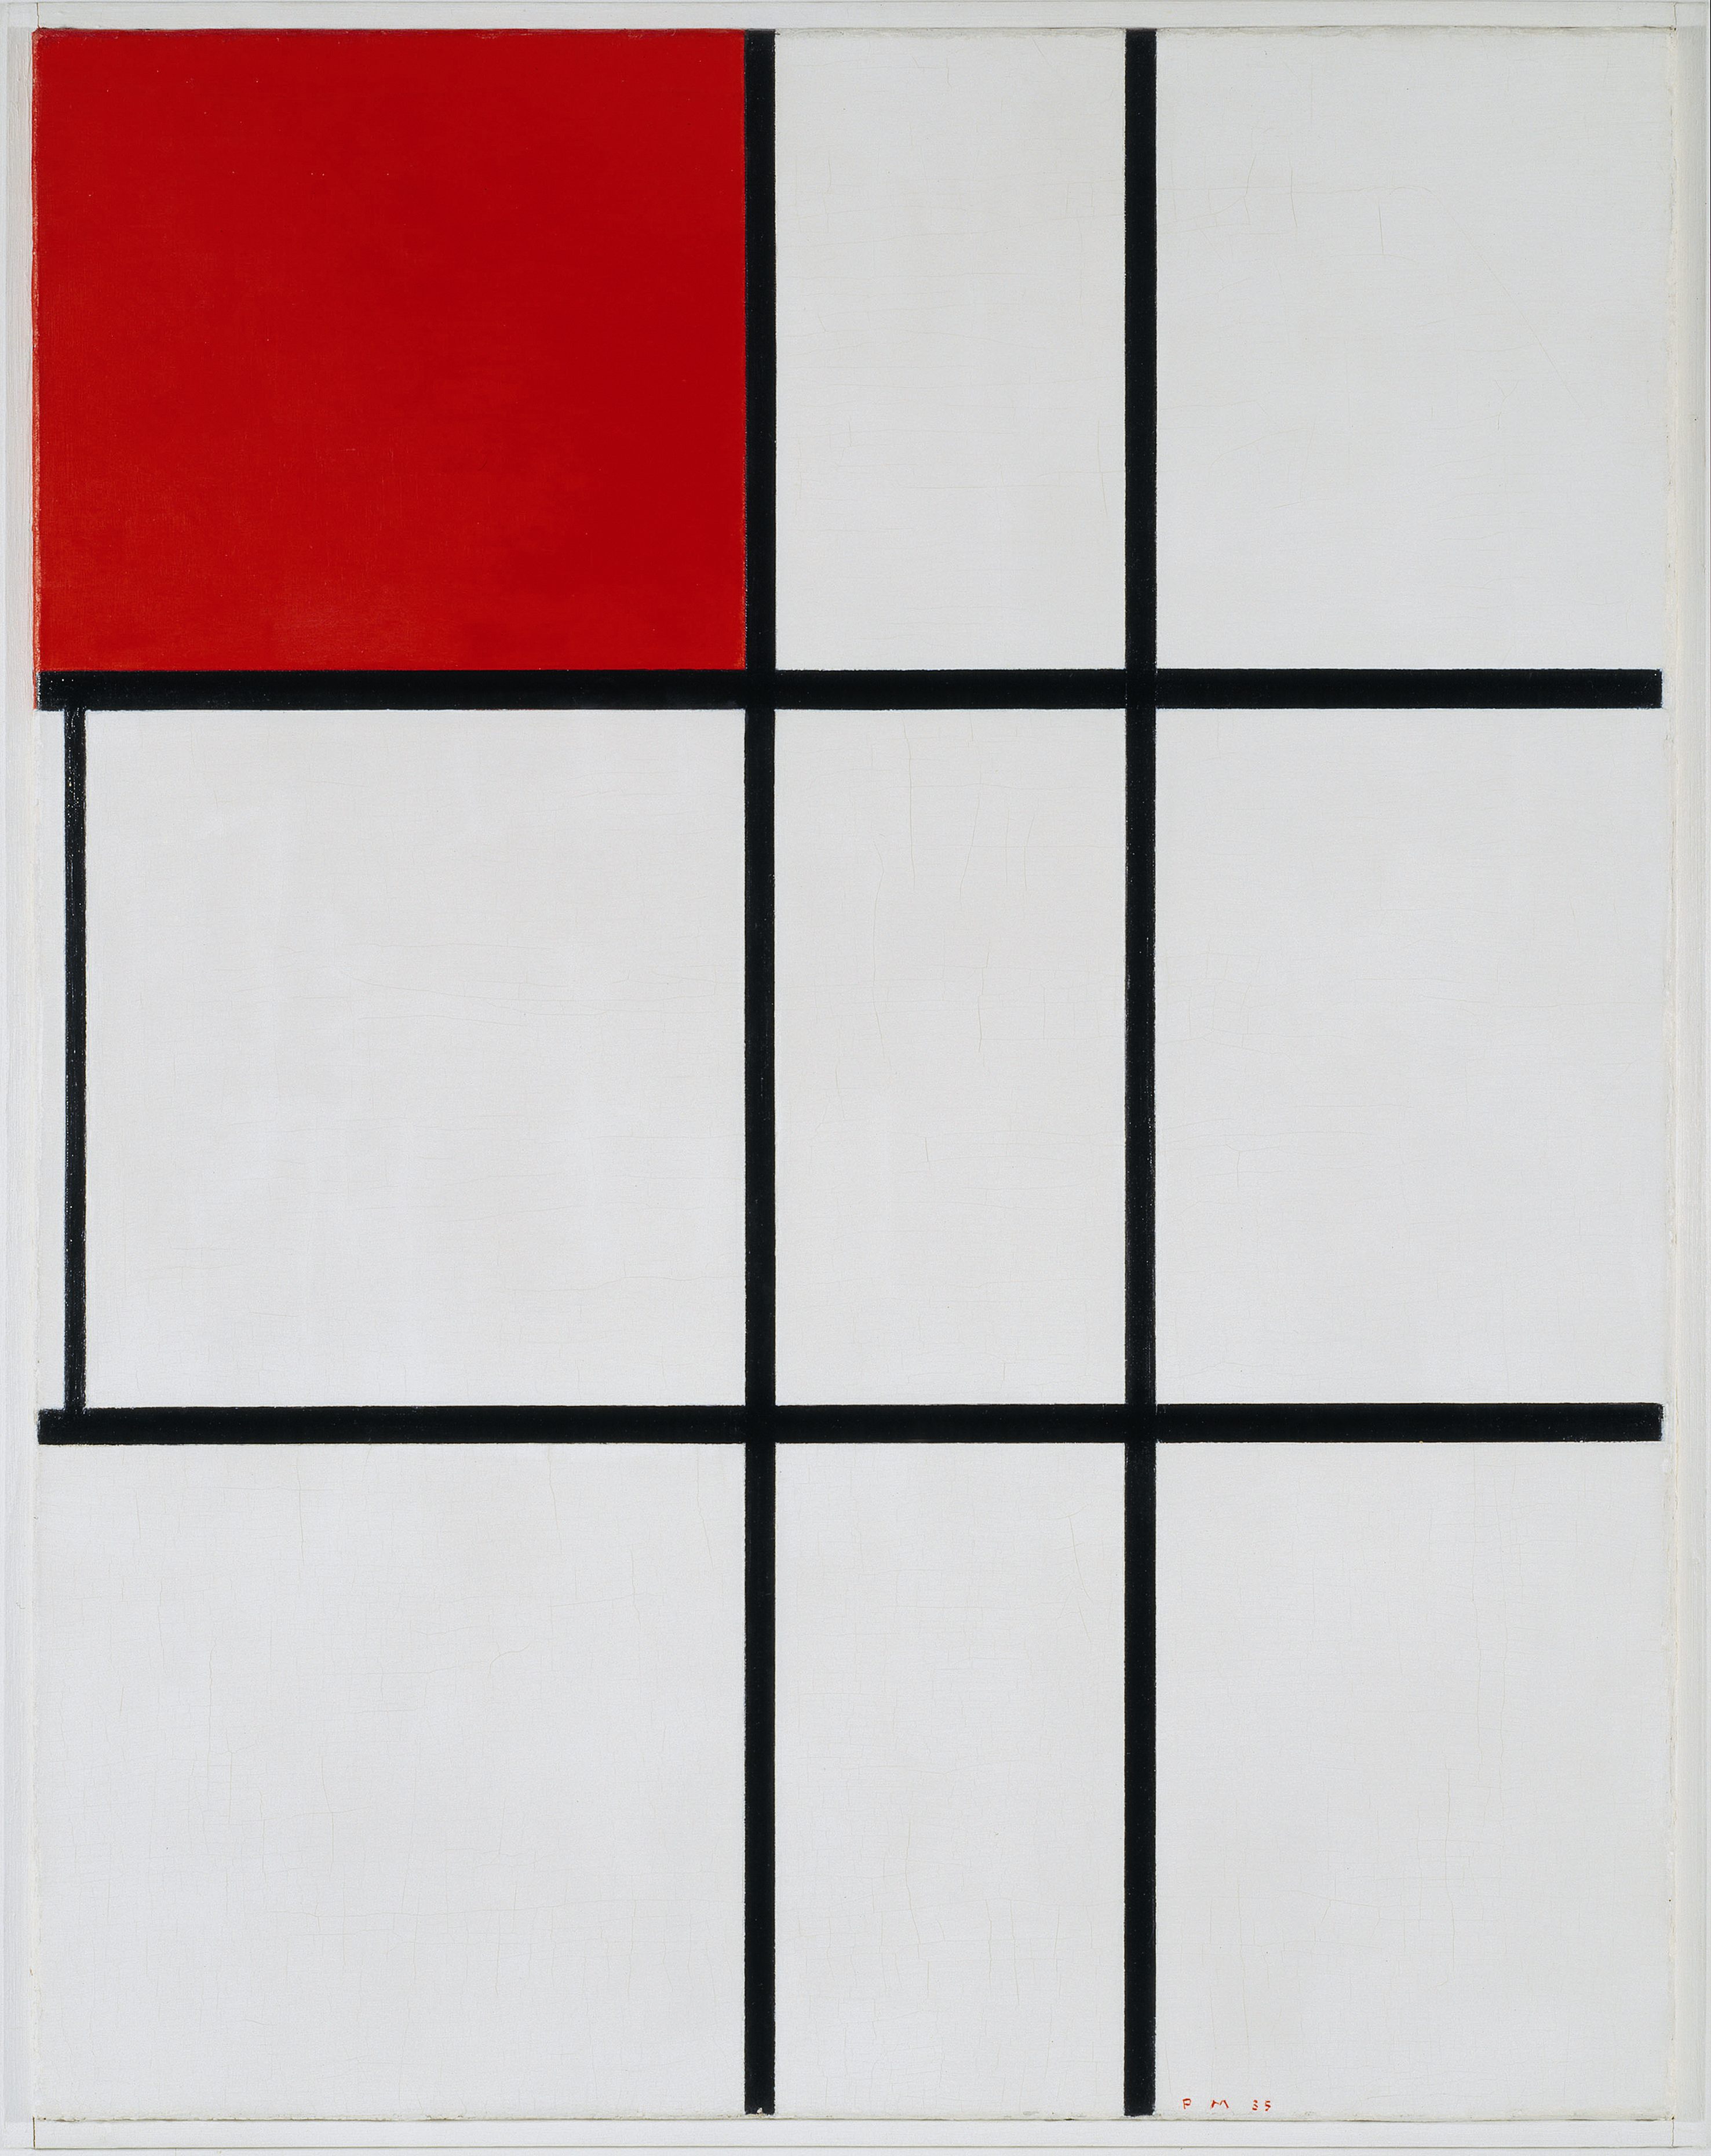 Composition B (No.II) with Red by Piet Mondrian - 1935 - 80.3 x 63.3 cm Tate Modern